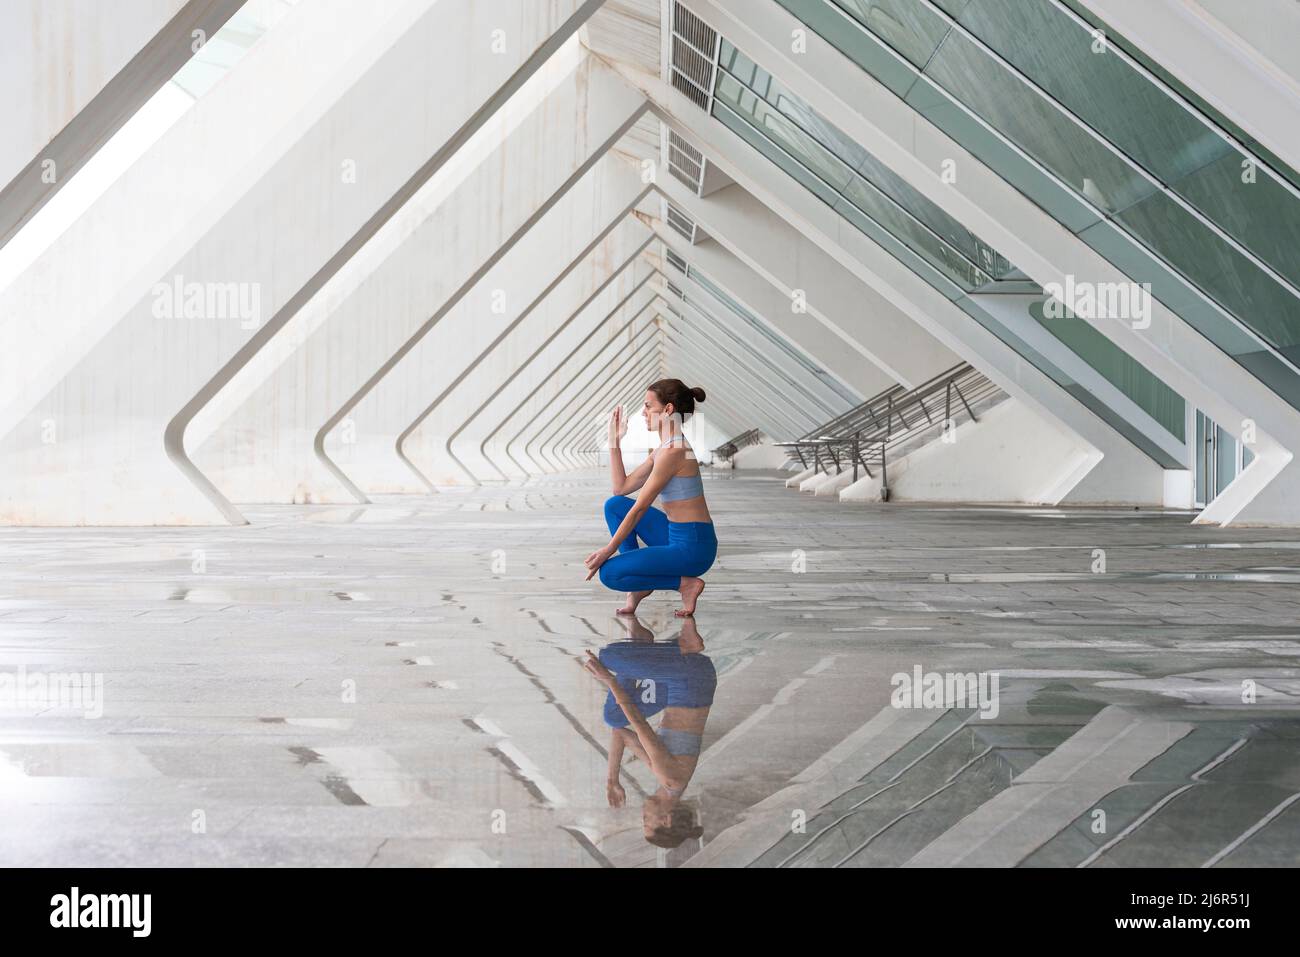 woman practices yoga asana Toe Balance pose outdoors against the background of modern urban architecture. Stock Photo